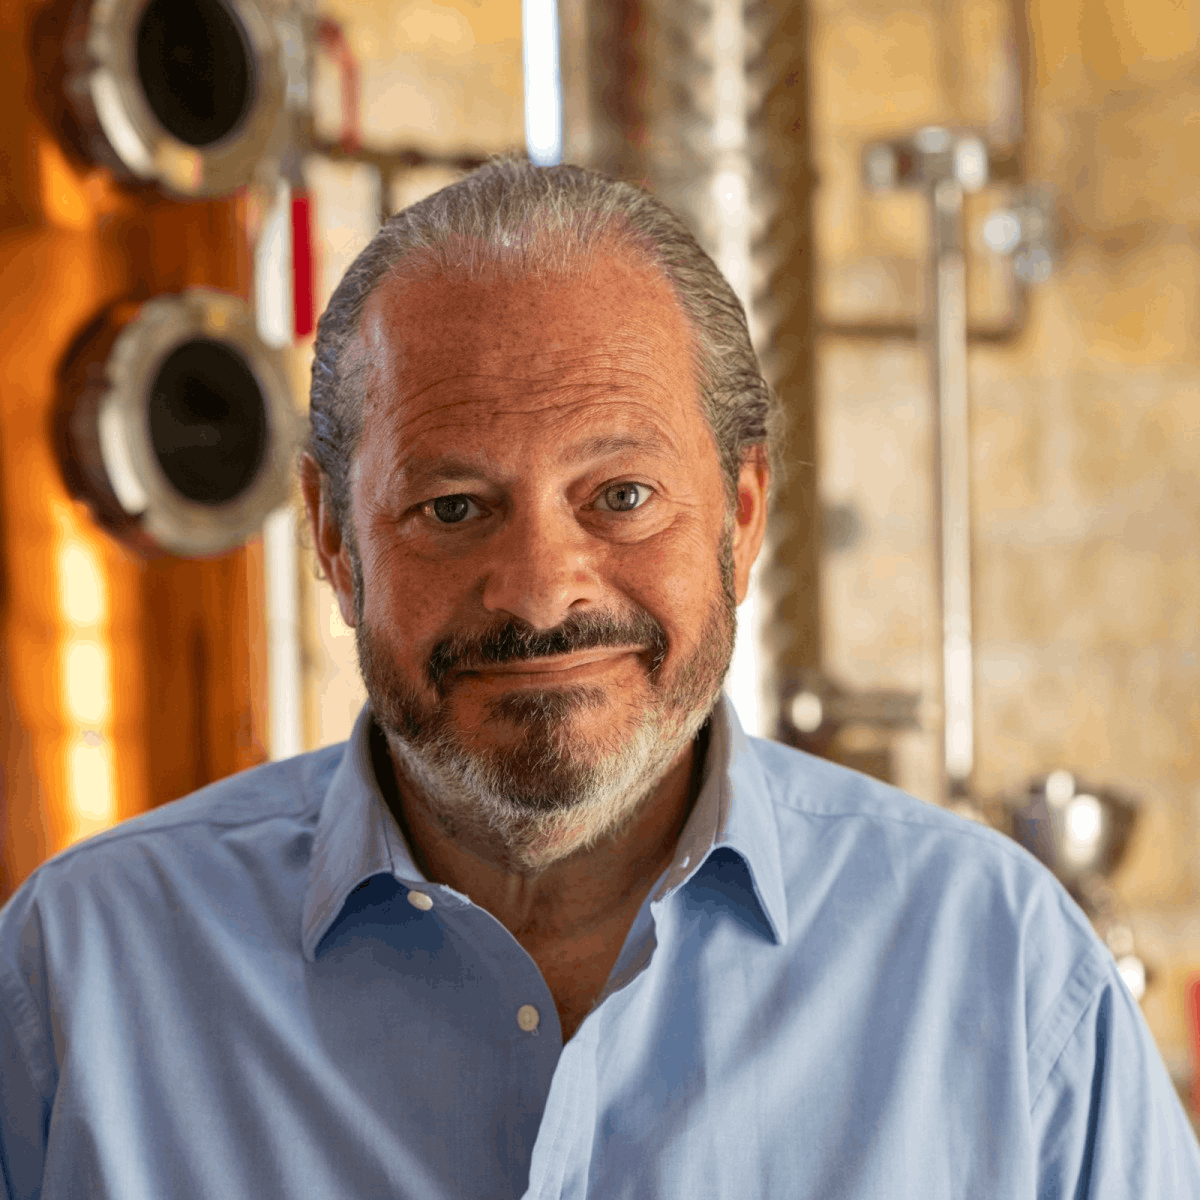 Cotswolds gin founder